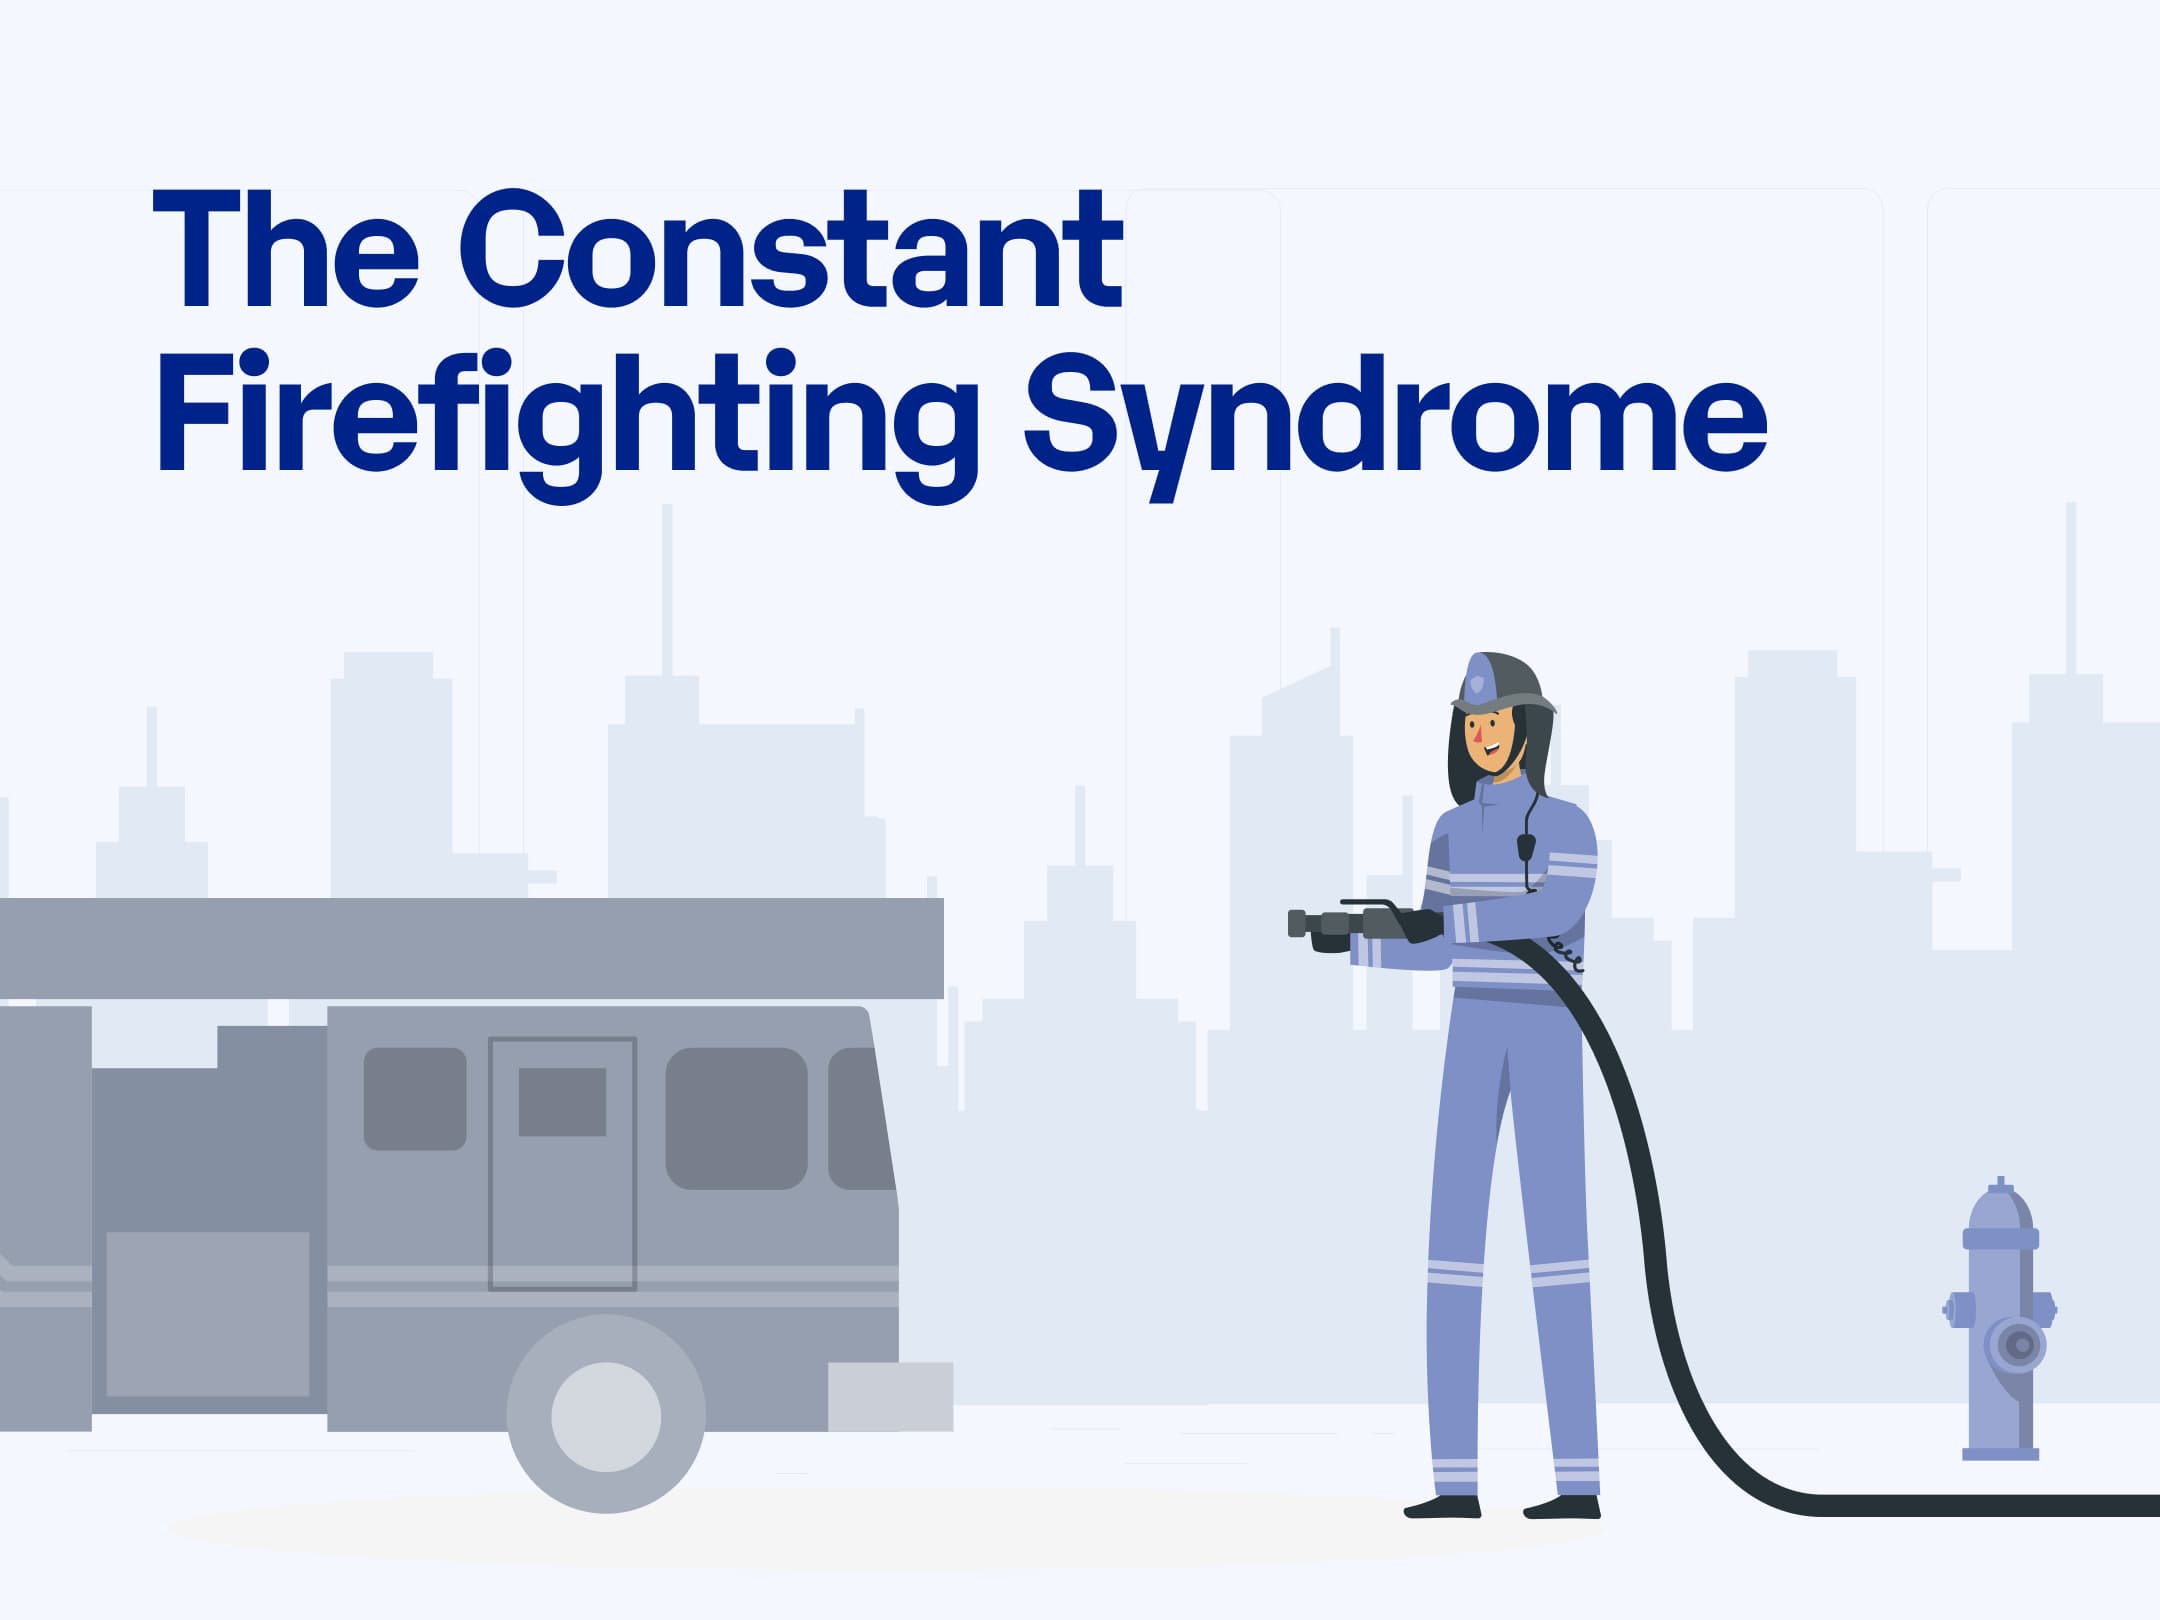 The Constant Firefighting Syndrome